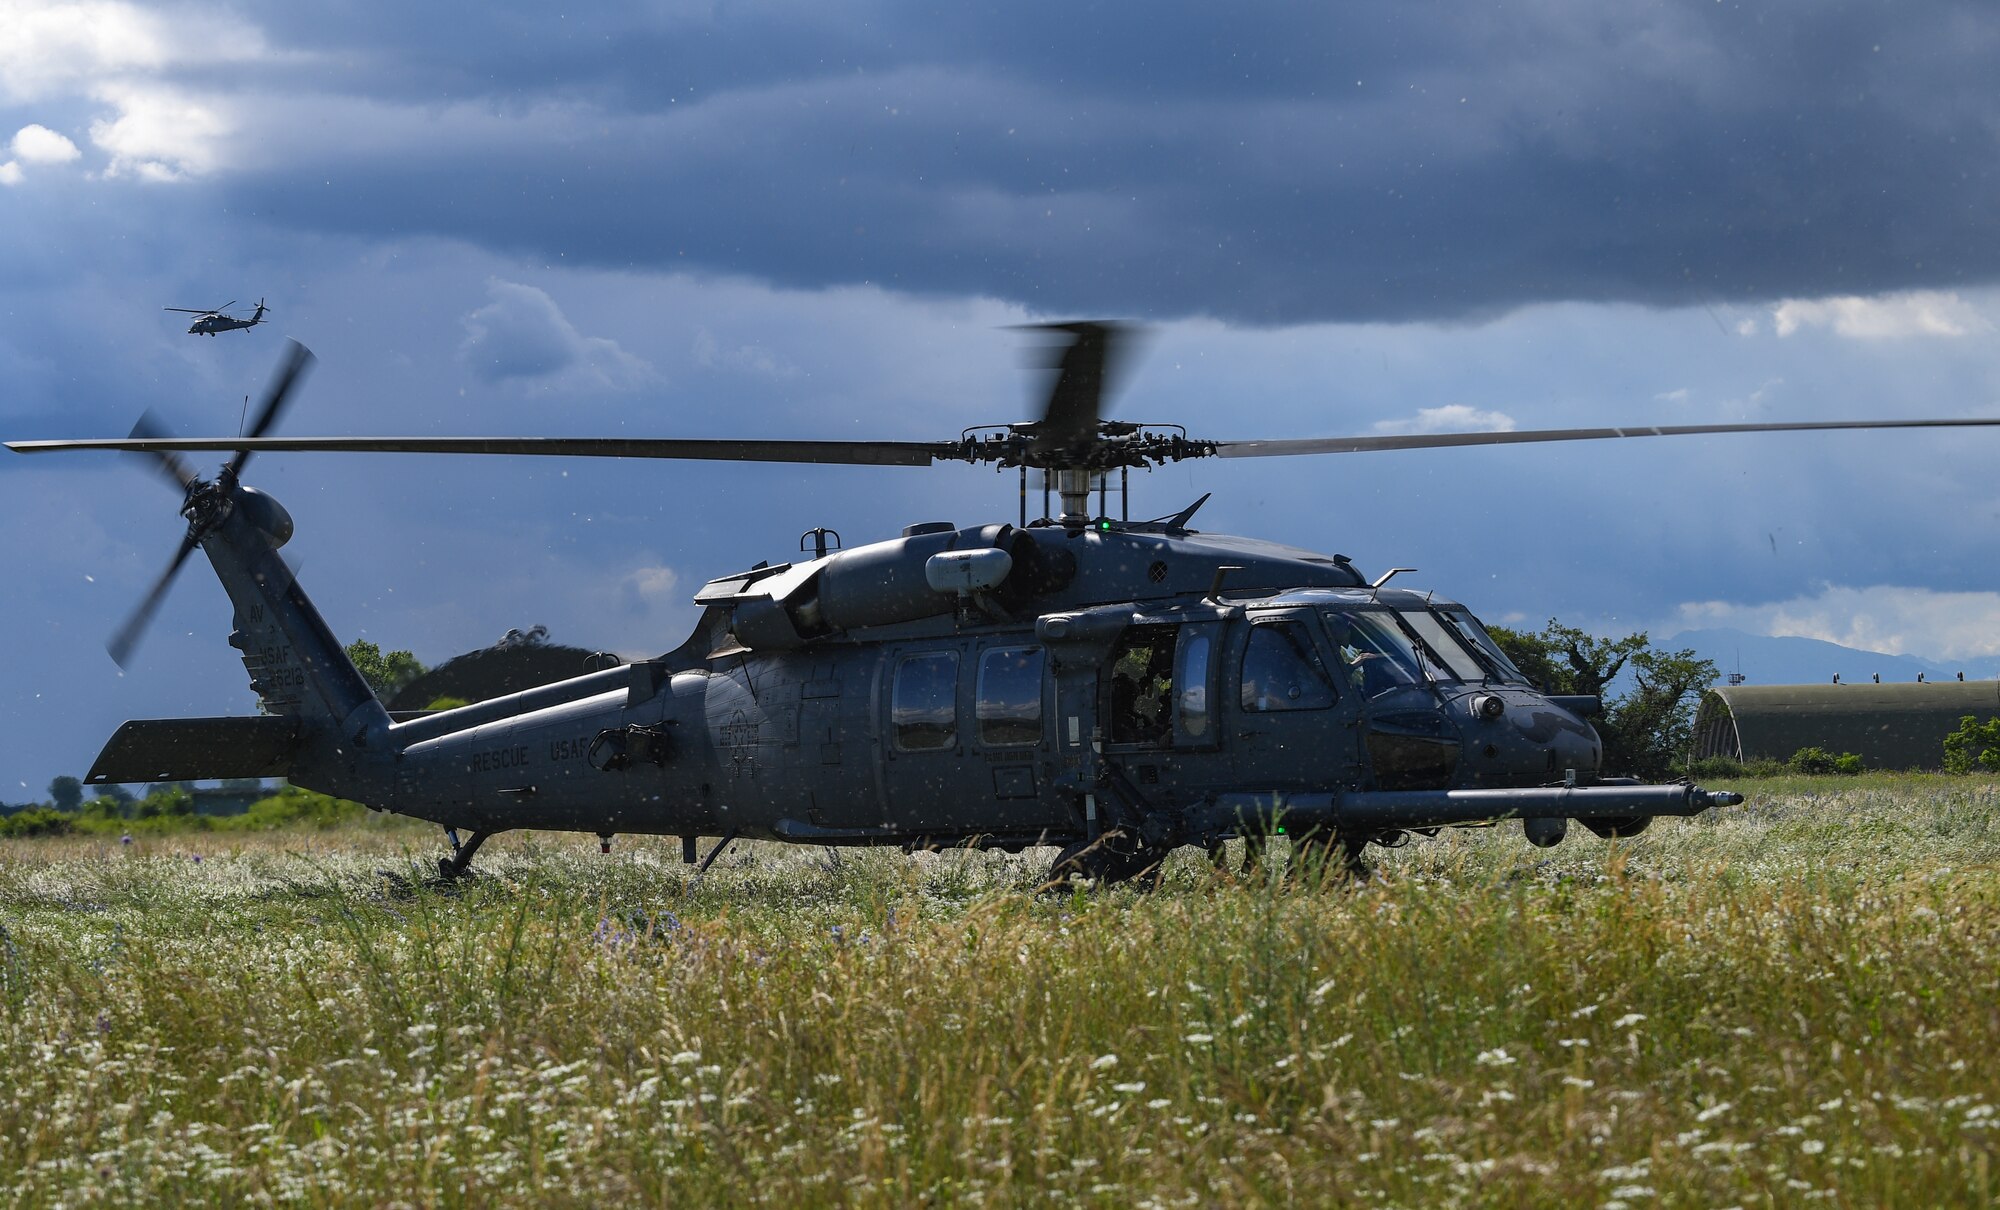 A U.S. Air Force HH-60G Pave Hawk helicopter assigned to the 56th Rescue Squadron lands at Rivolto Air Base, Italy, June 11, 2020. The 56th RQS integrates with the Guardian Angels weapon system and other special forces to support insertion, extraction and recovery of both U.S. and allied combatants. (U.S. Air Force photo by Airman 1st Class Thomas S. Keisler IV)